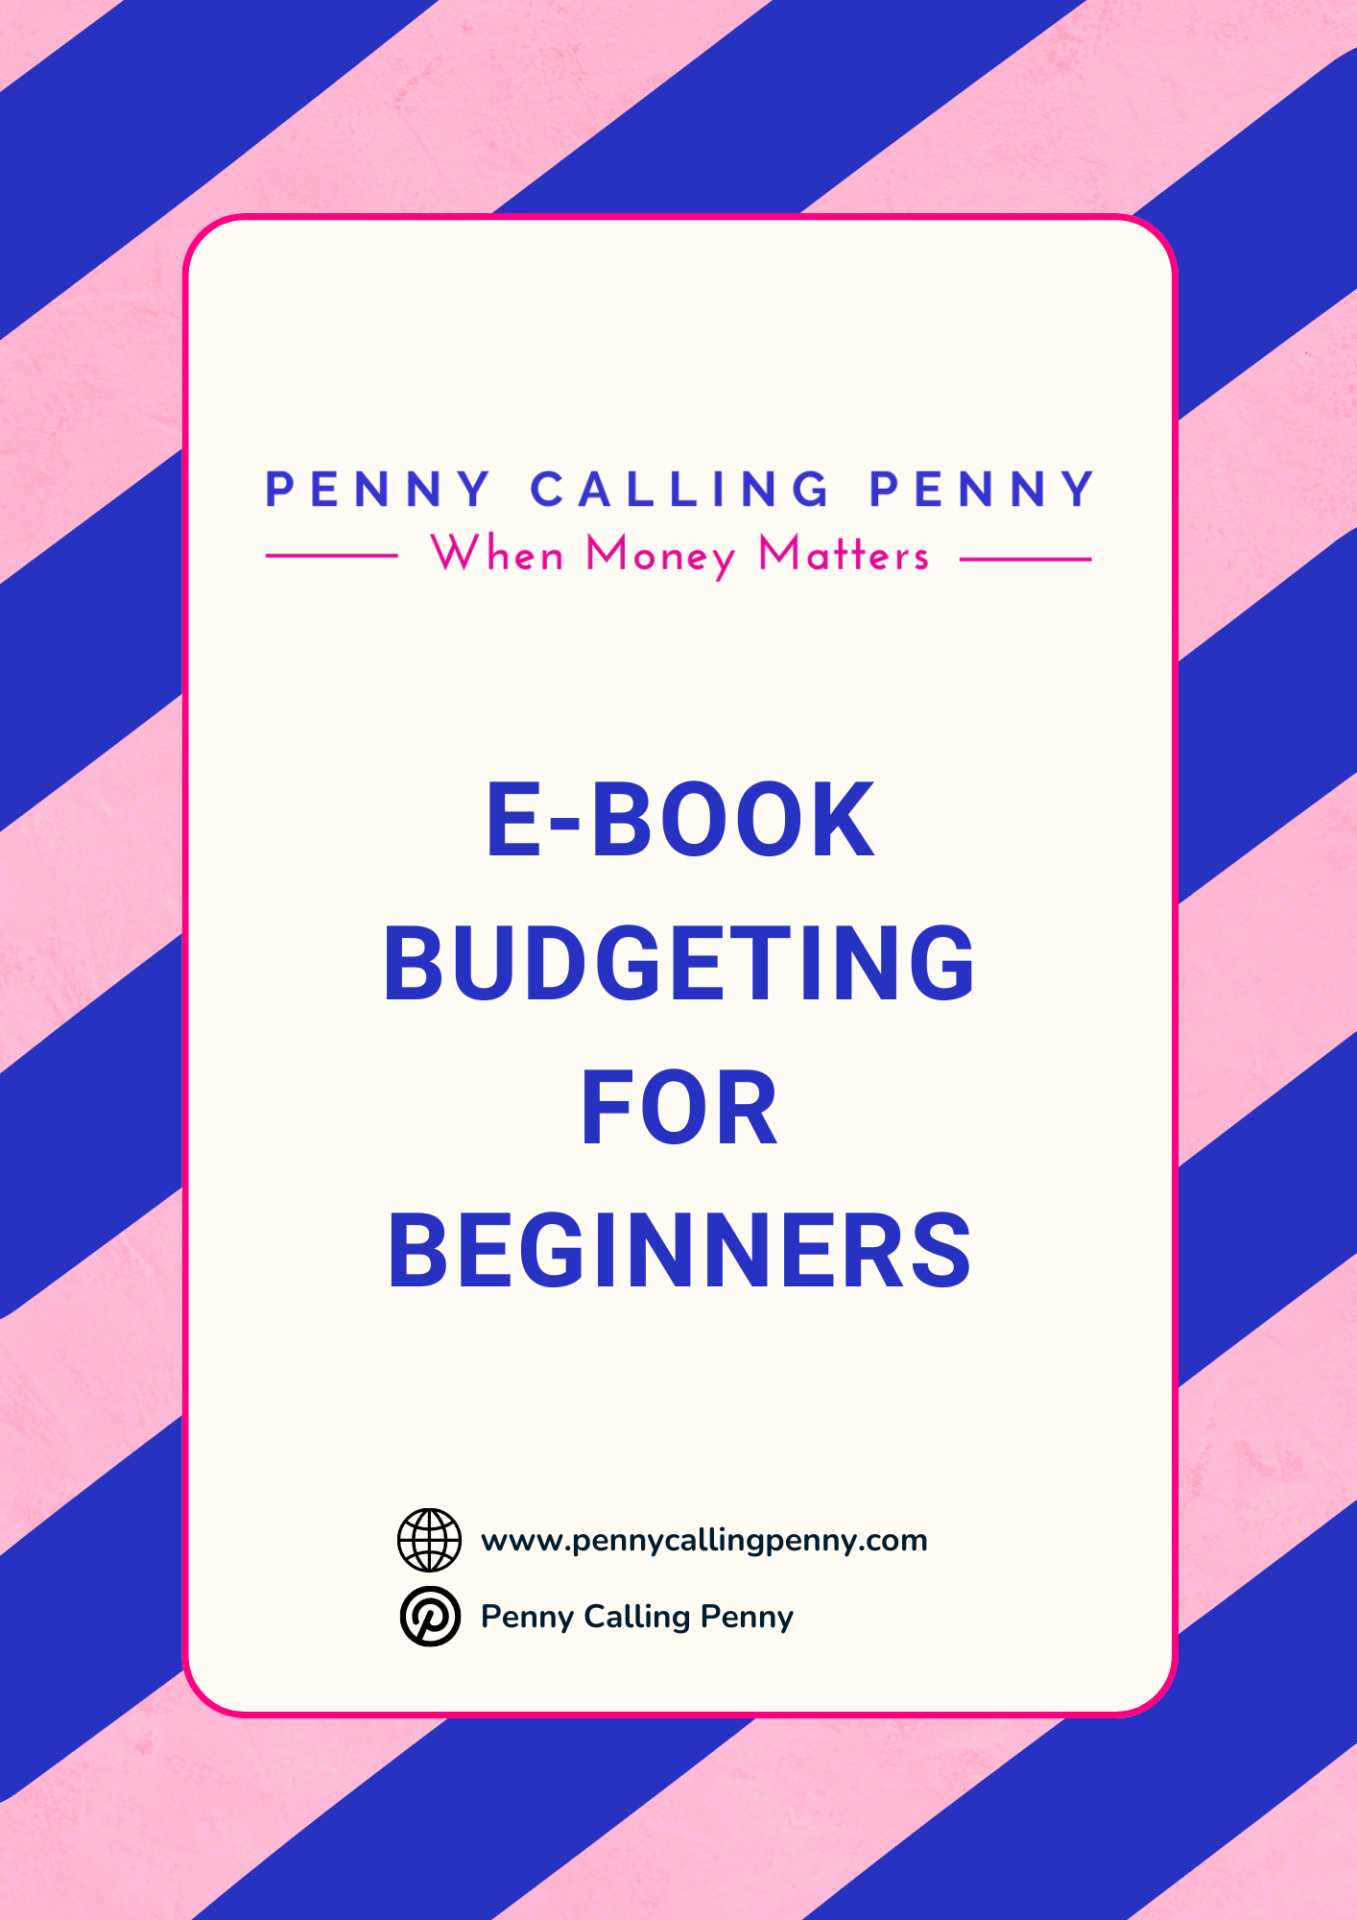 E-Book Budgeting For Begginers